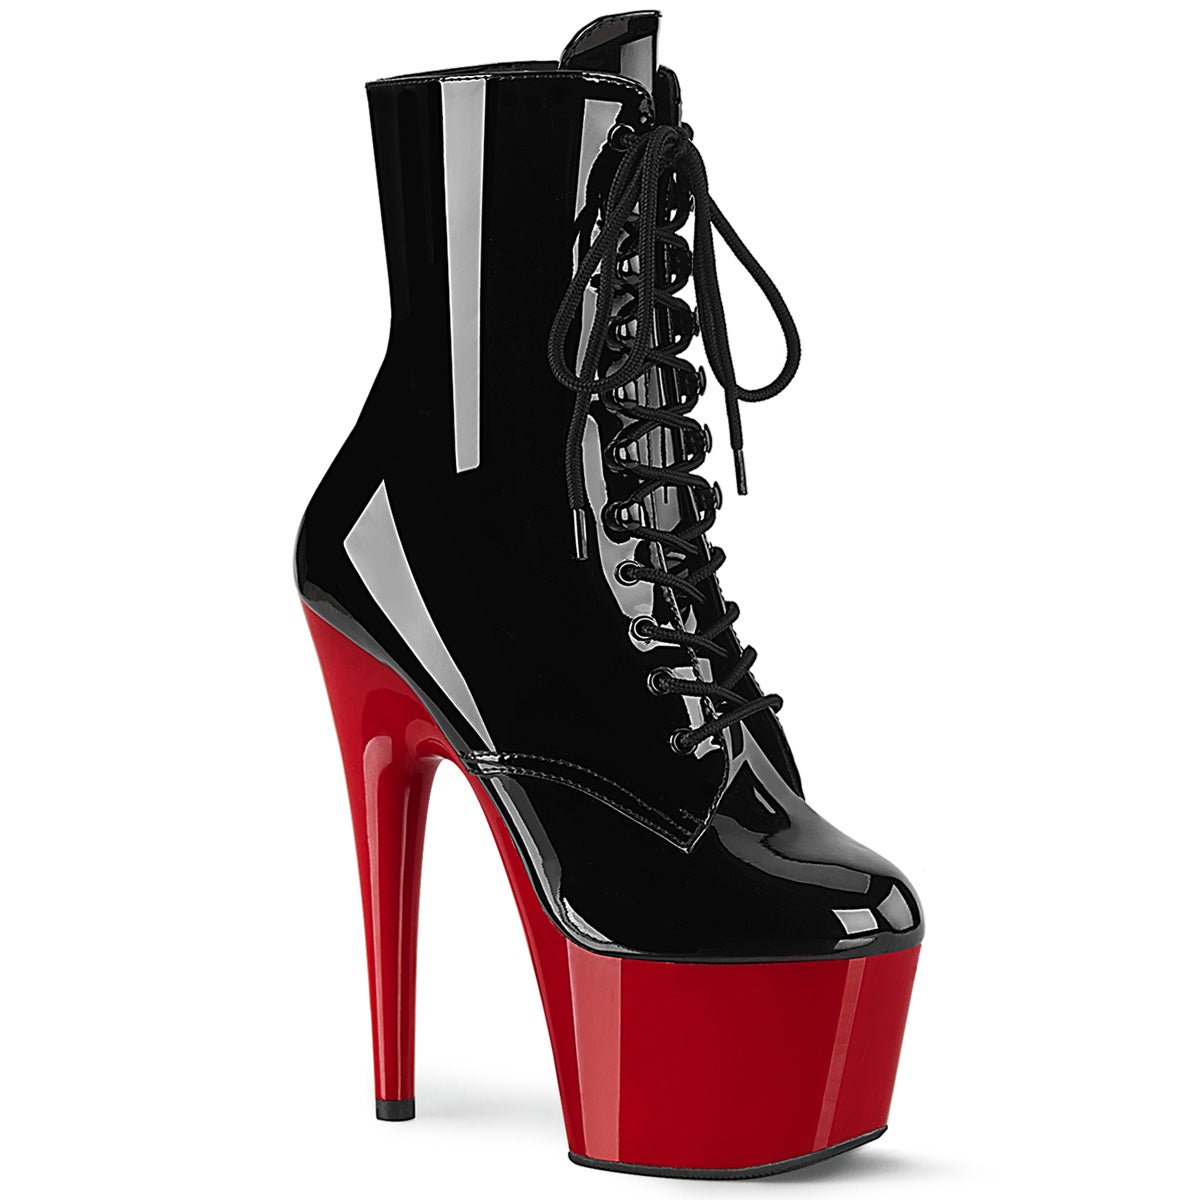 Pleaser ADORE 1020-1 Platform Boots,Front Lace Boots - From Pleaser Sold By Alternative Footwear